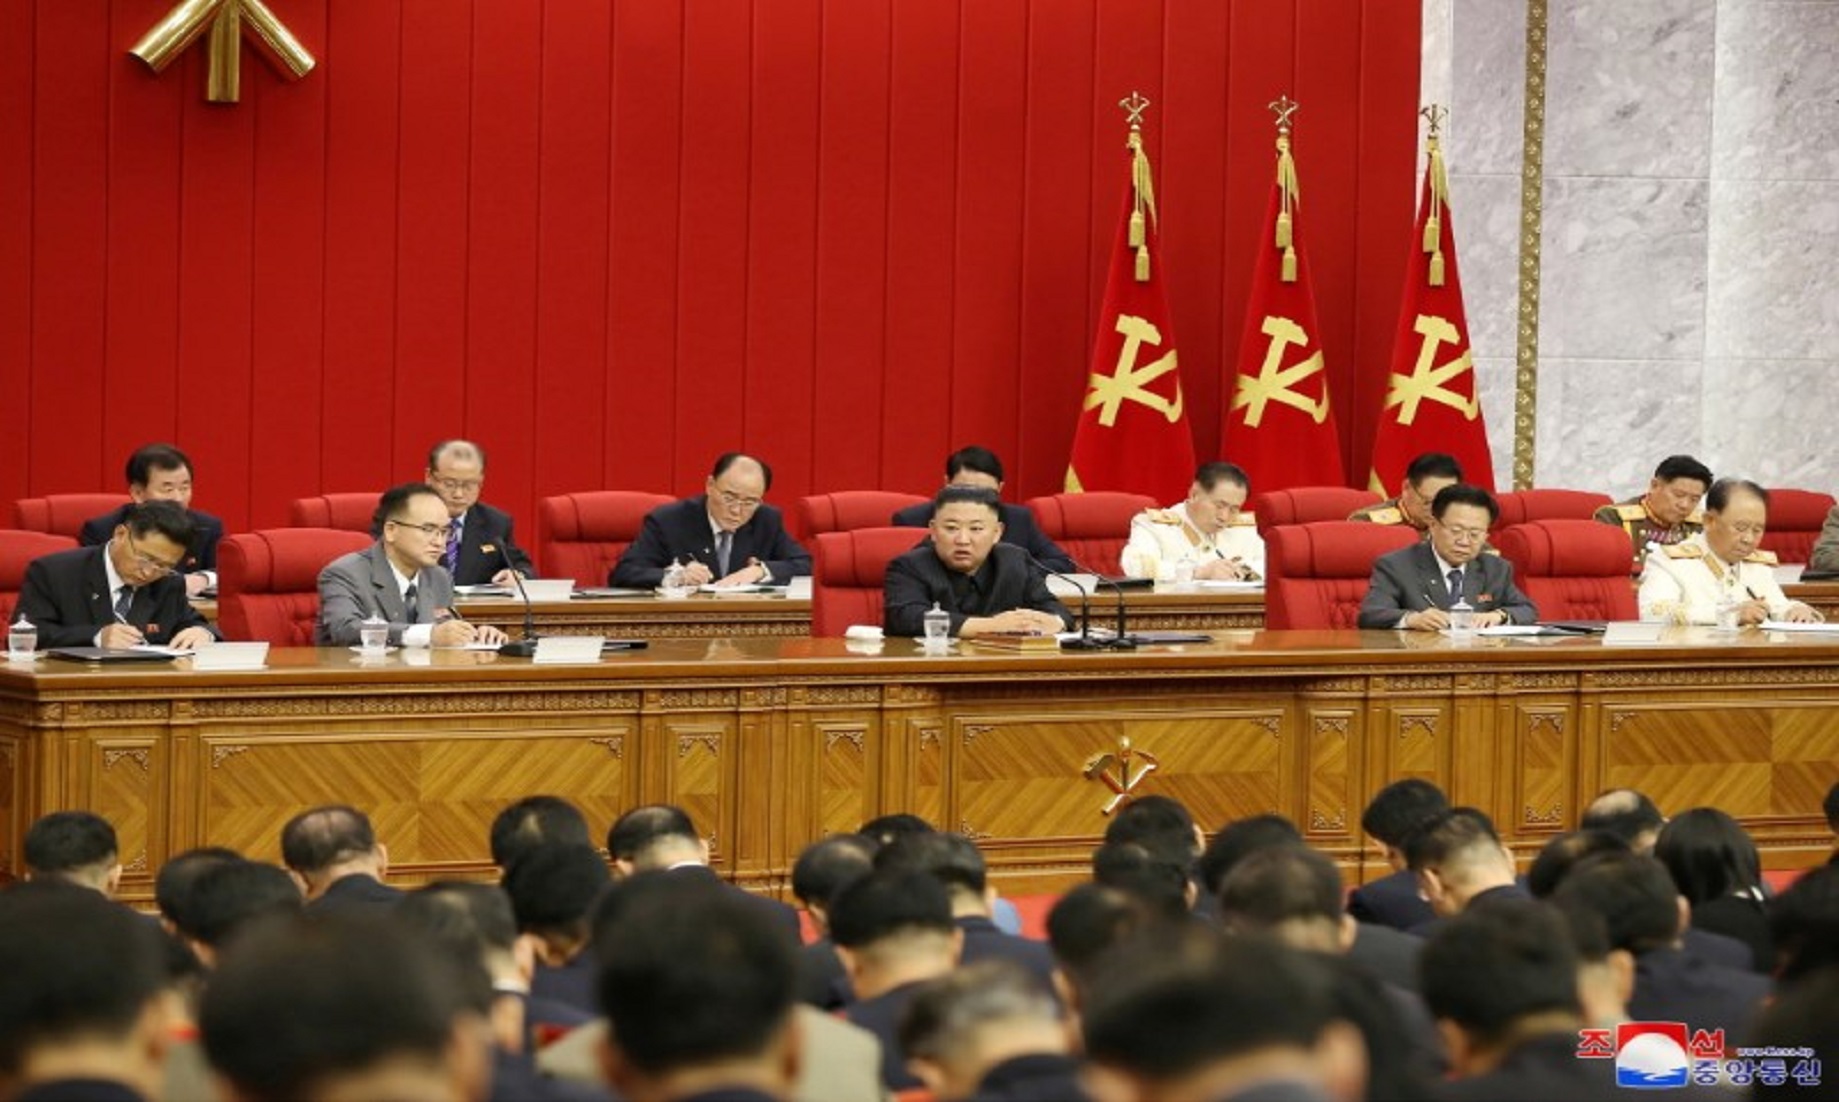 DPRK Leader Concludes Party Session, Vows To Overcome All Difficulties